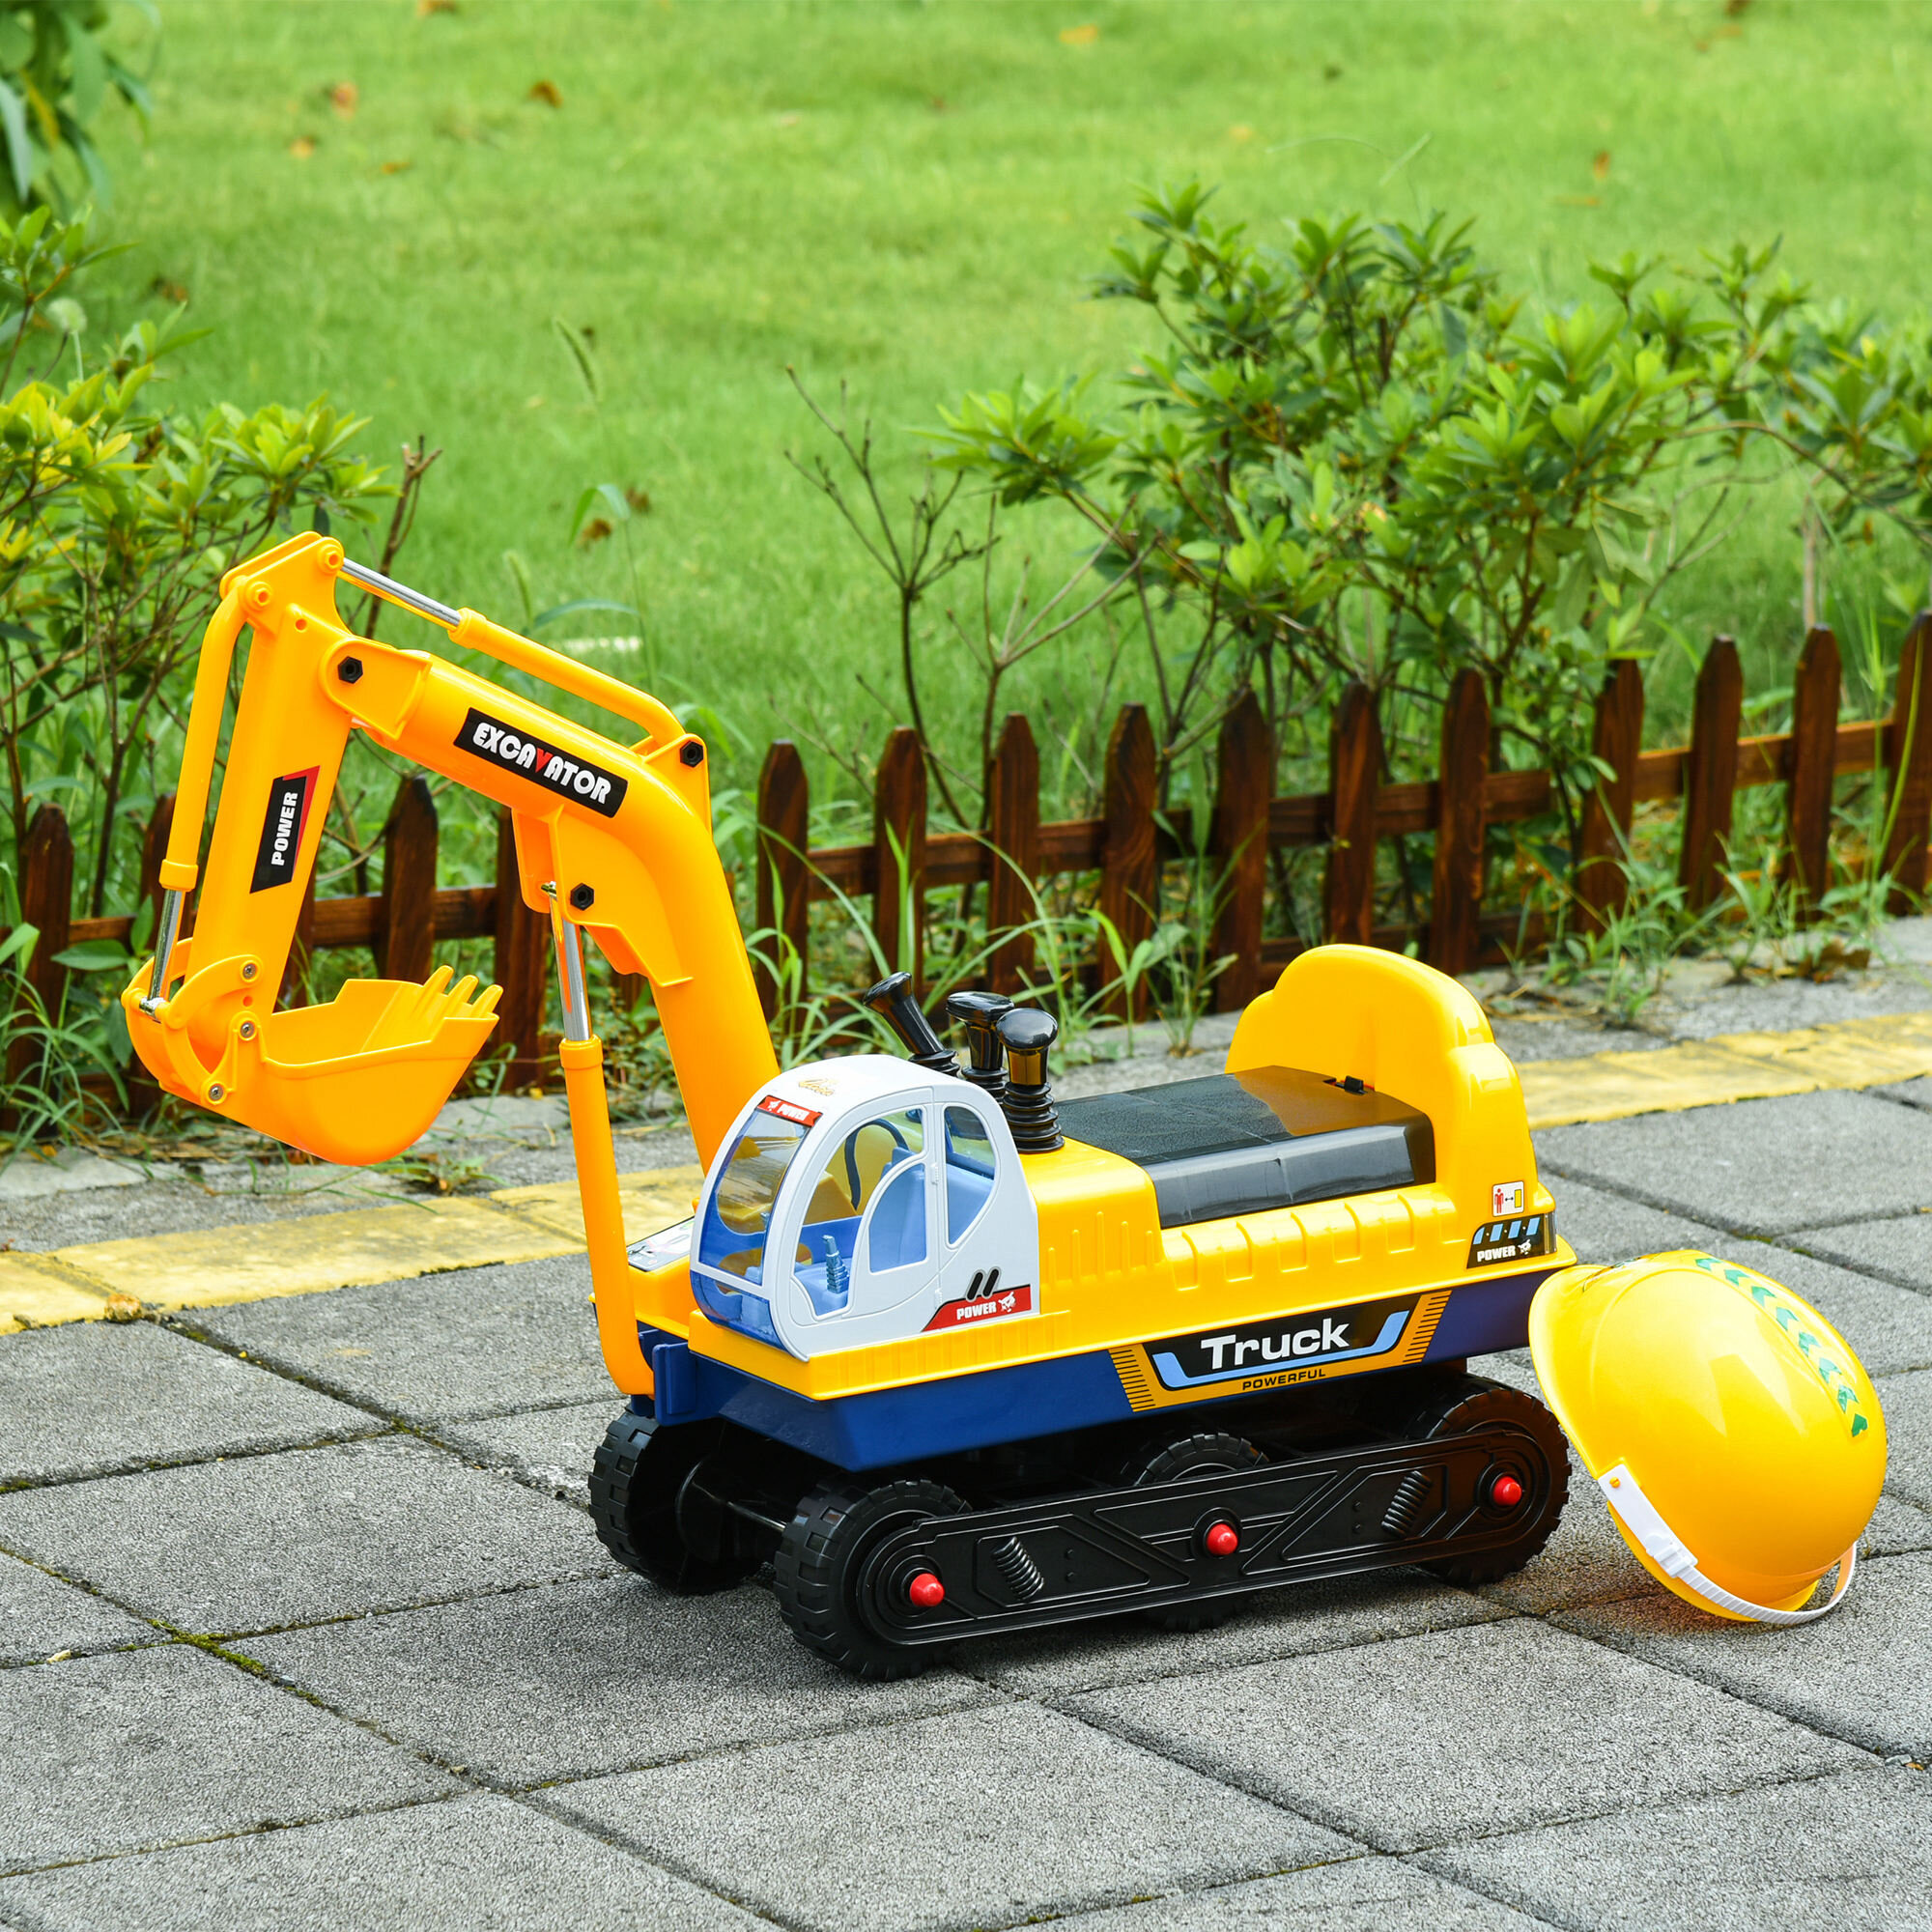 New Ride On Toy Truck Car Excavator Builders Digger And Hard Hat Kids Play Set 